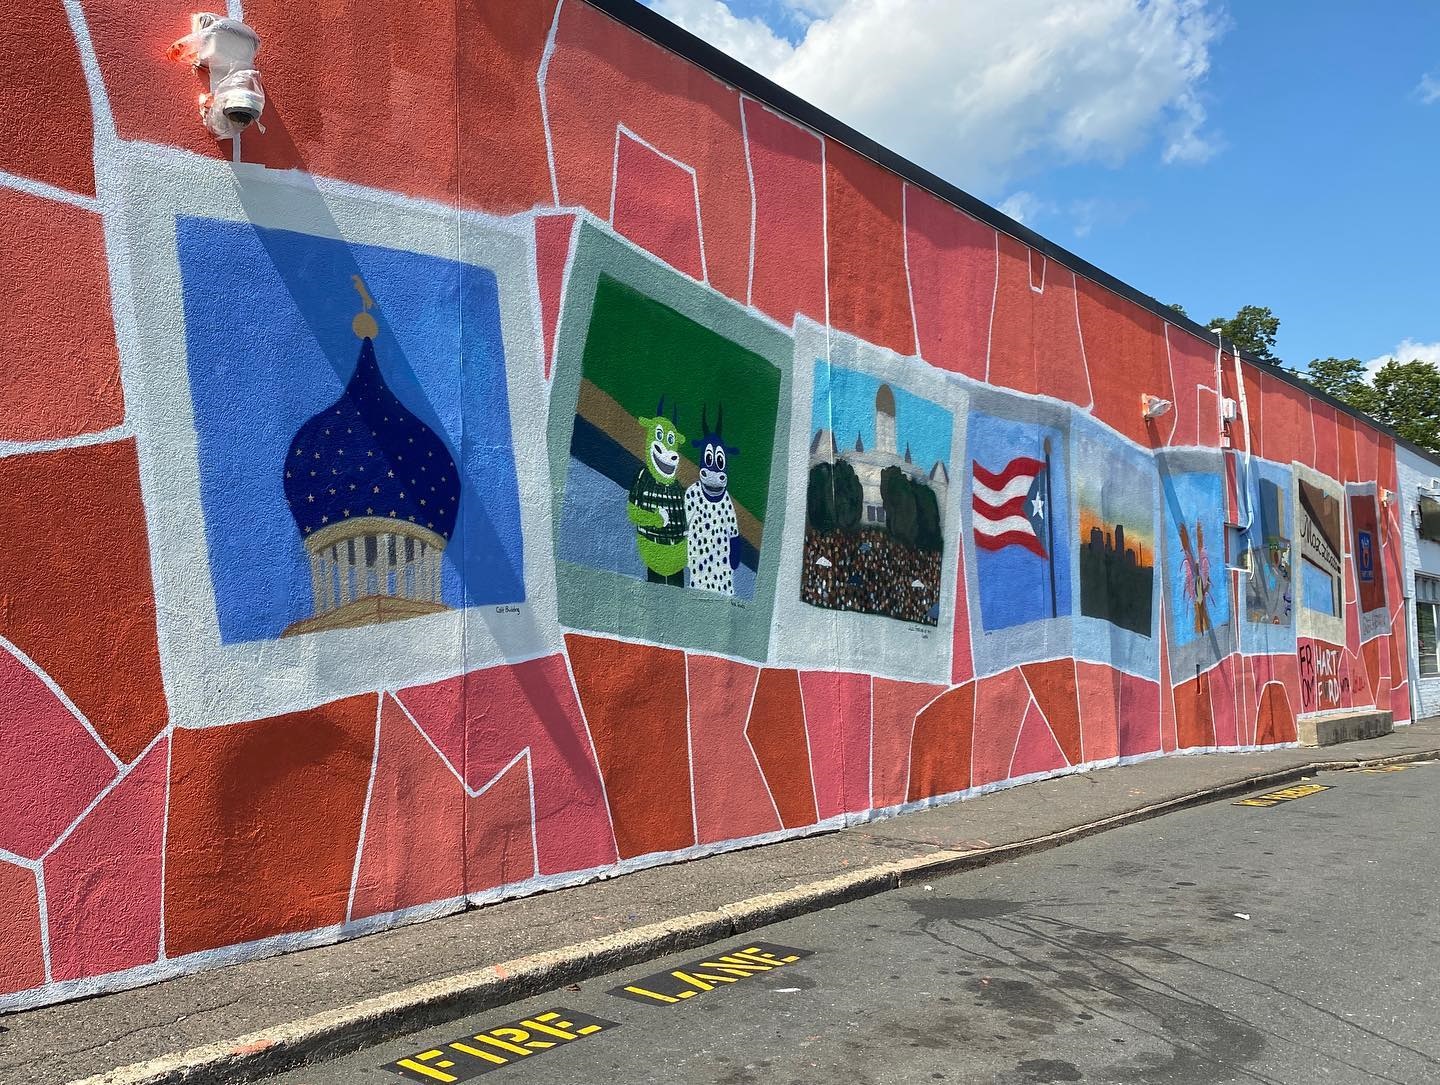 The Hartford Postcard Mural Project